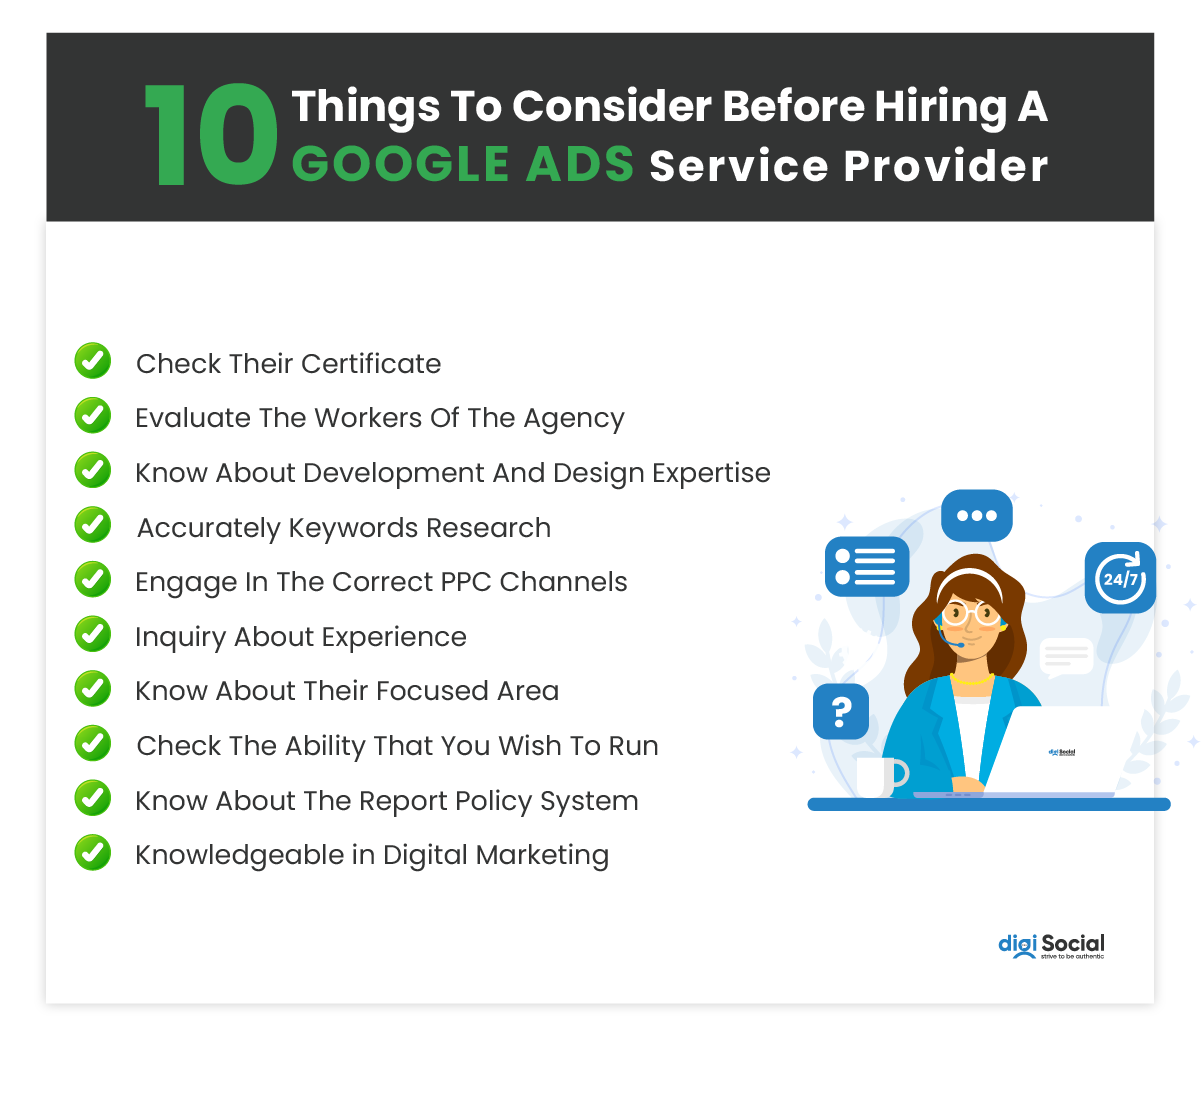 10 Things To Consider Before Hiring A Google Ads Service Provider